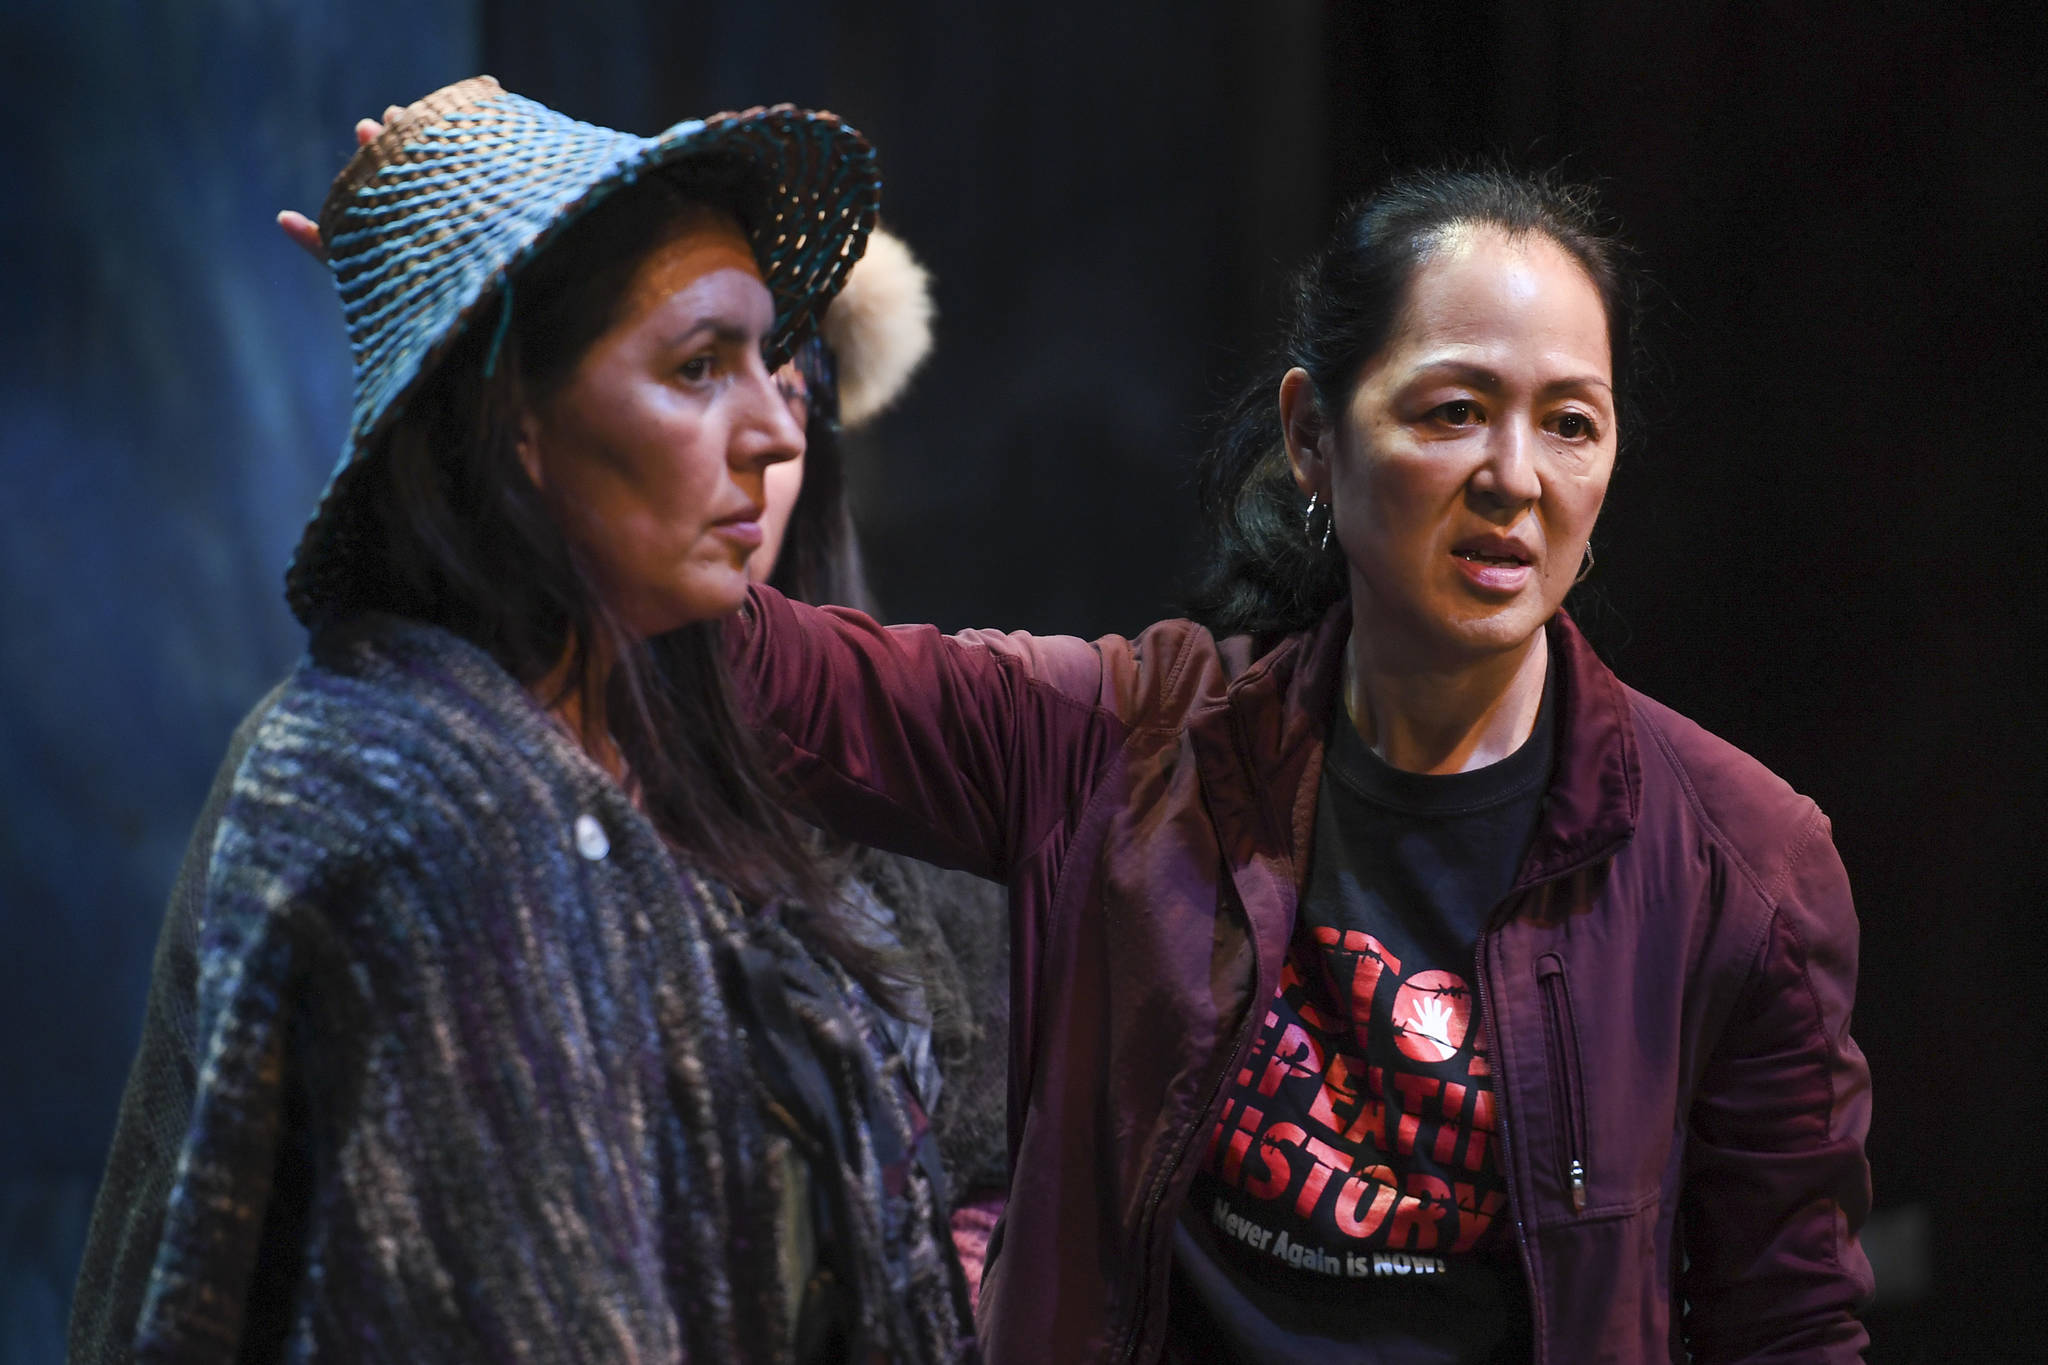 Director Leslie Ishii, right, works with actress Jennifer Bobiwash during Perseverance Theatre’s production of “Devilfish” written by Vera Starbard on Tuesday, Sept. 17, 2019. (Michael Penn | Juneau Empire)